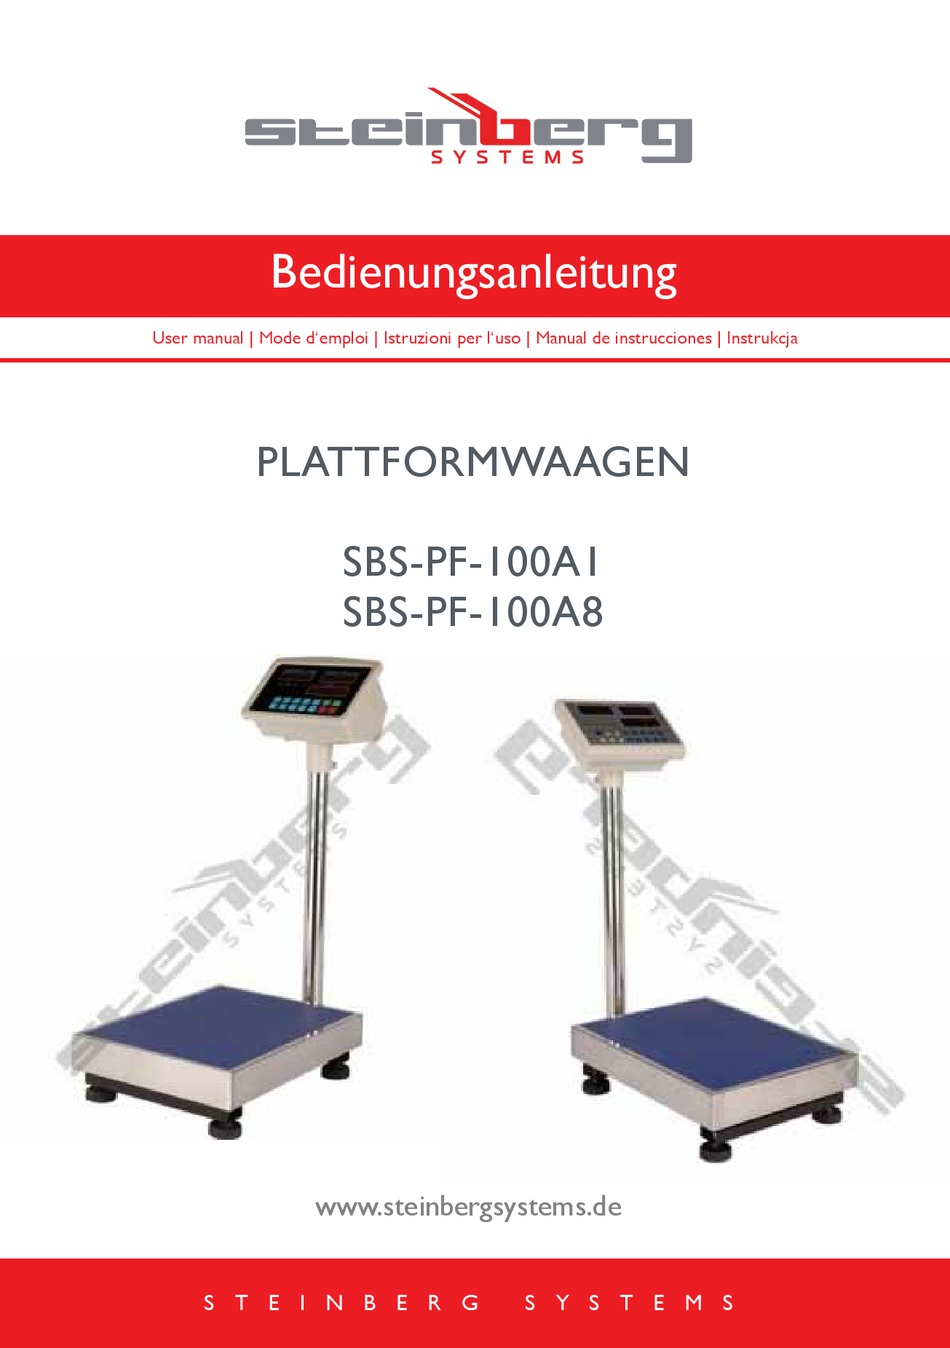 100 kg Foldable Platform Scale 220.4 lbs - LED /0.02 lbs SBS-PF-100A8 10 g Steinberg Systems